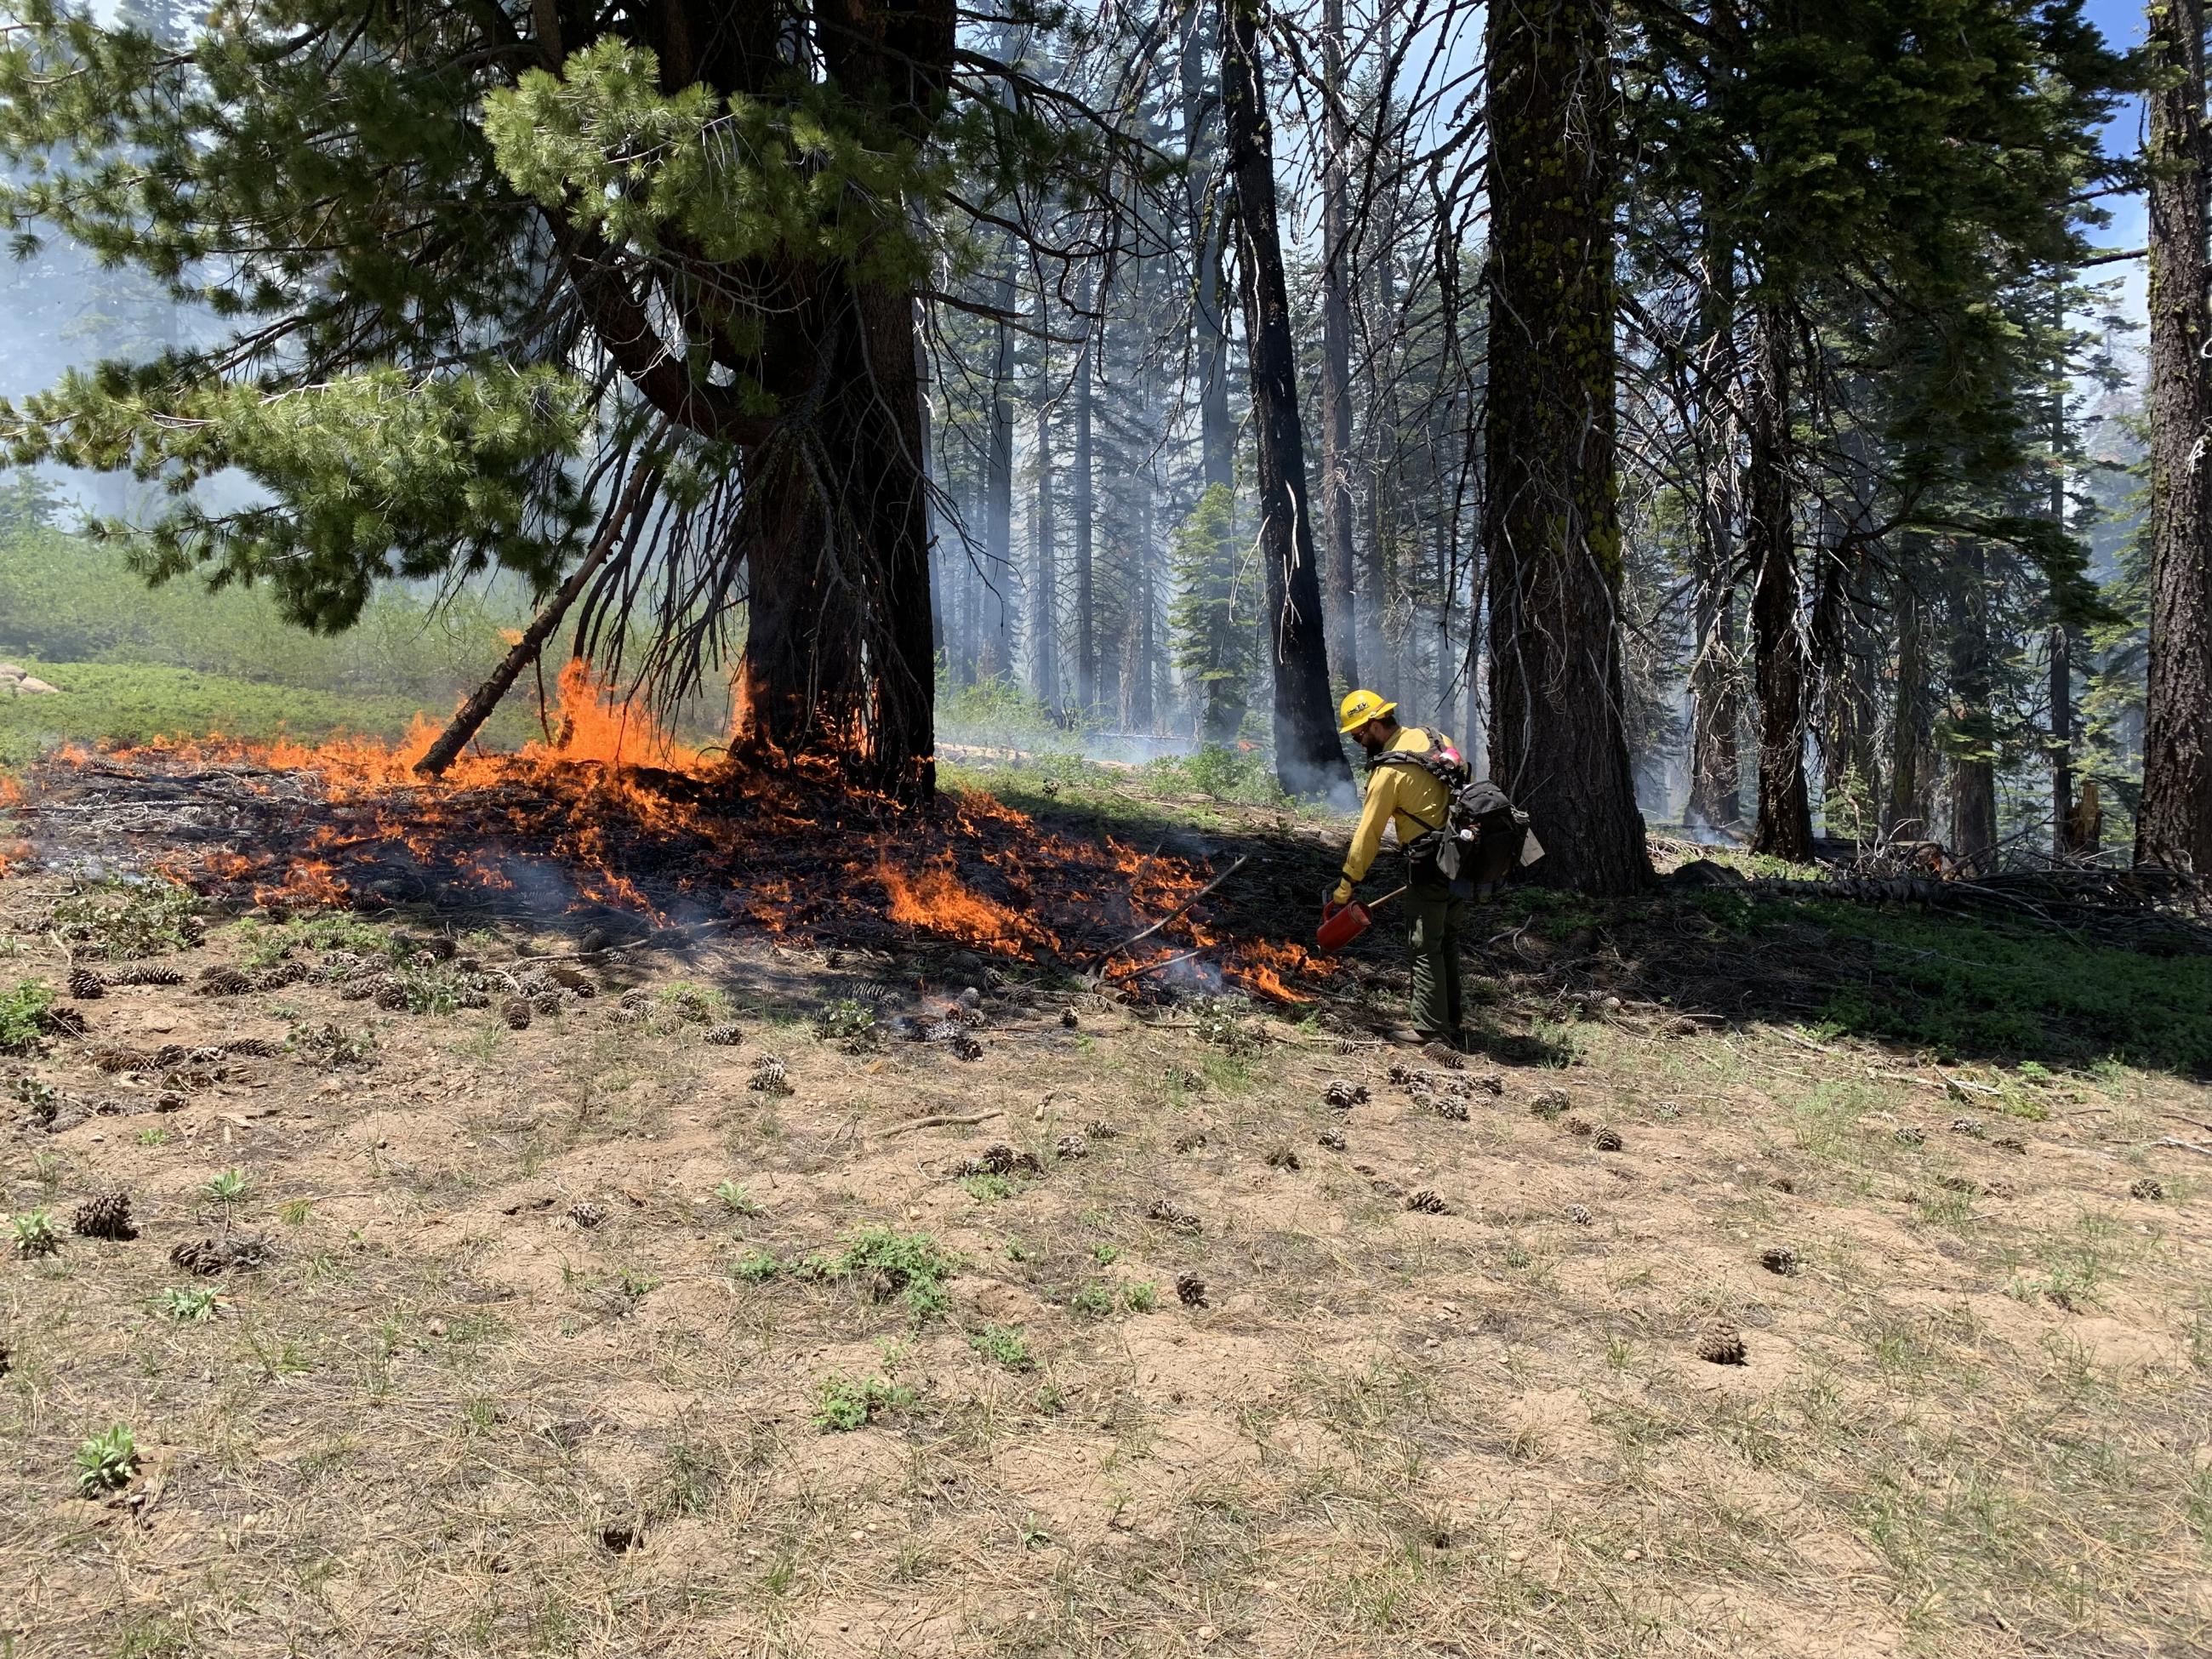 A wildland firefighter uses a drip torch to set prescribed fire